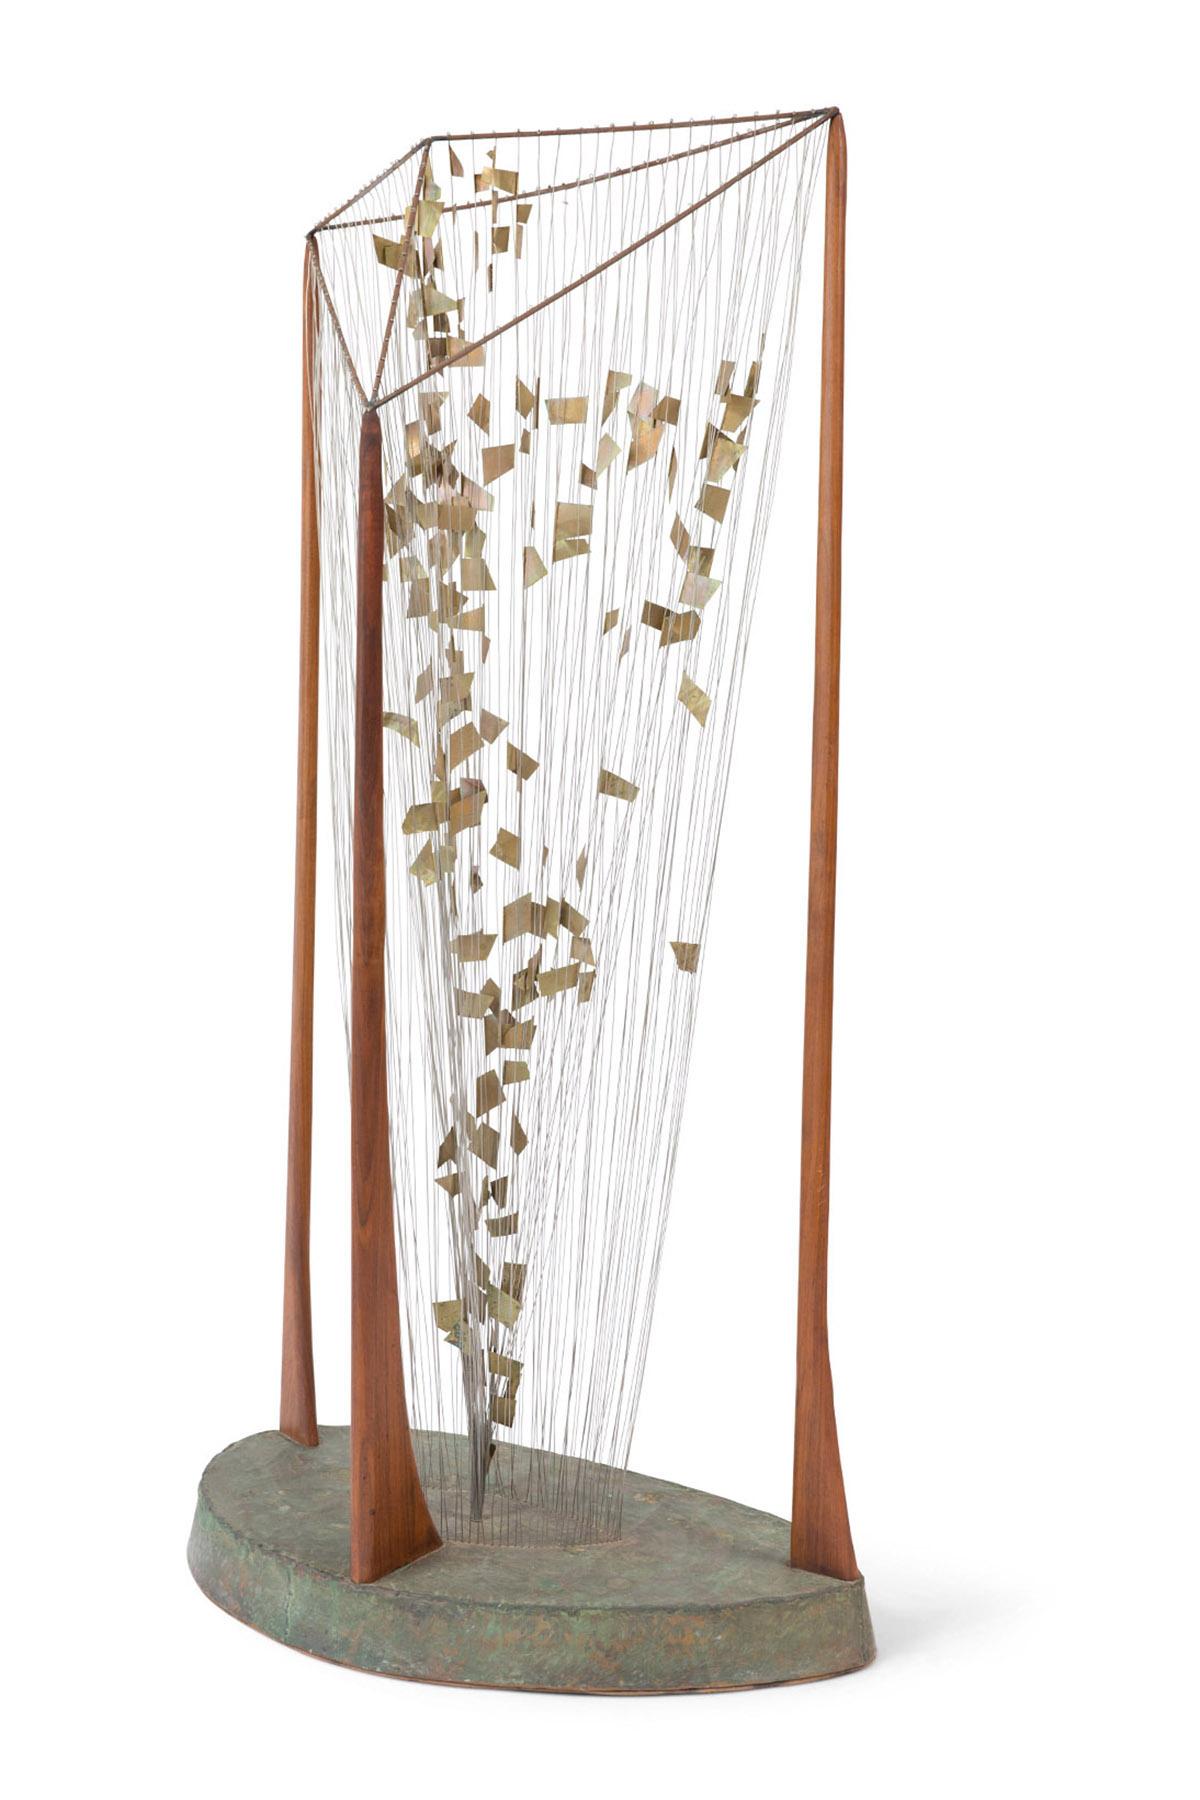 This one off, light and airy sculpture by Southwest artist and furniture-maker Allen Ditson features a green patina-rich copper base and three vertical sculptural walnut pieces that frame a center characterized by harp rays of wire with fluttering